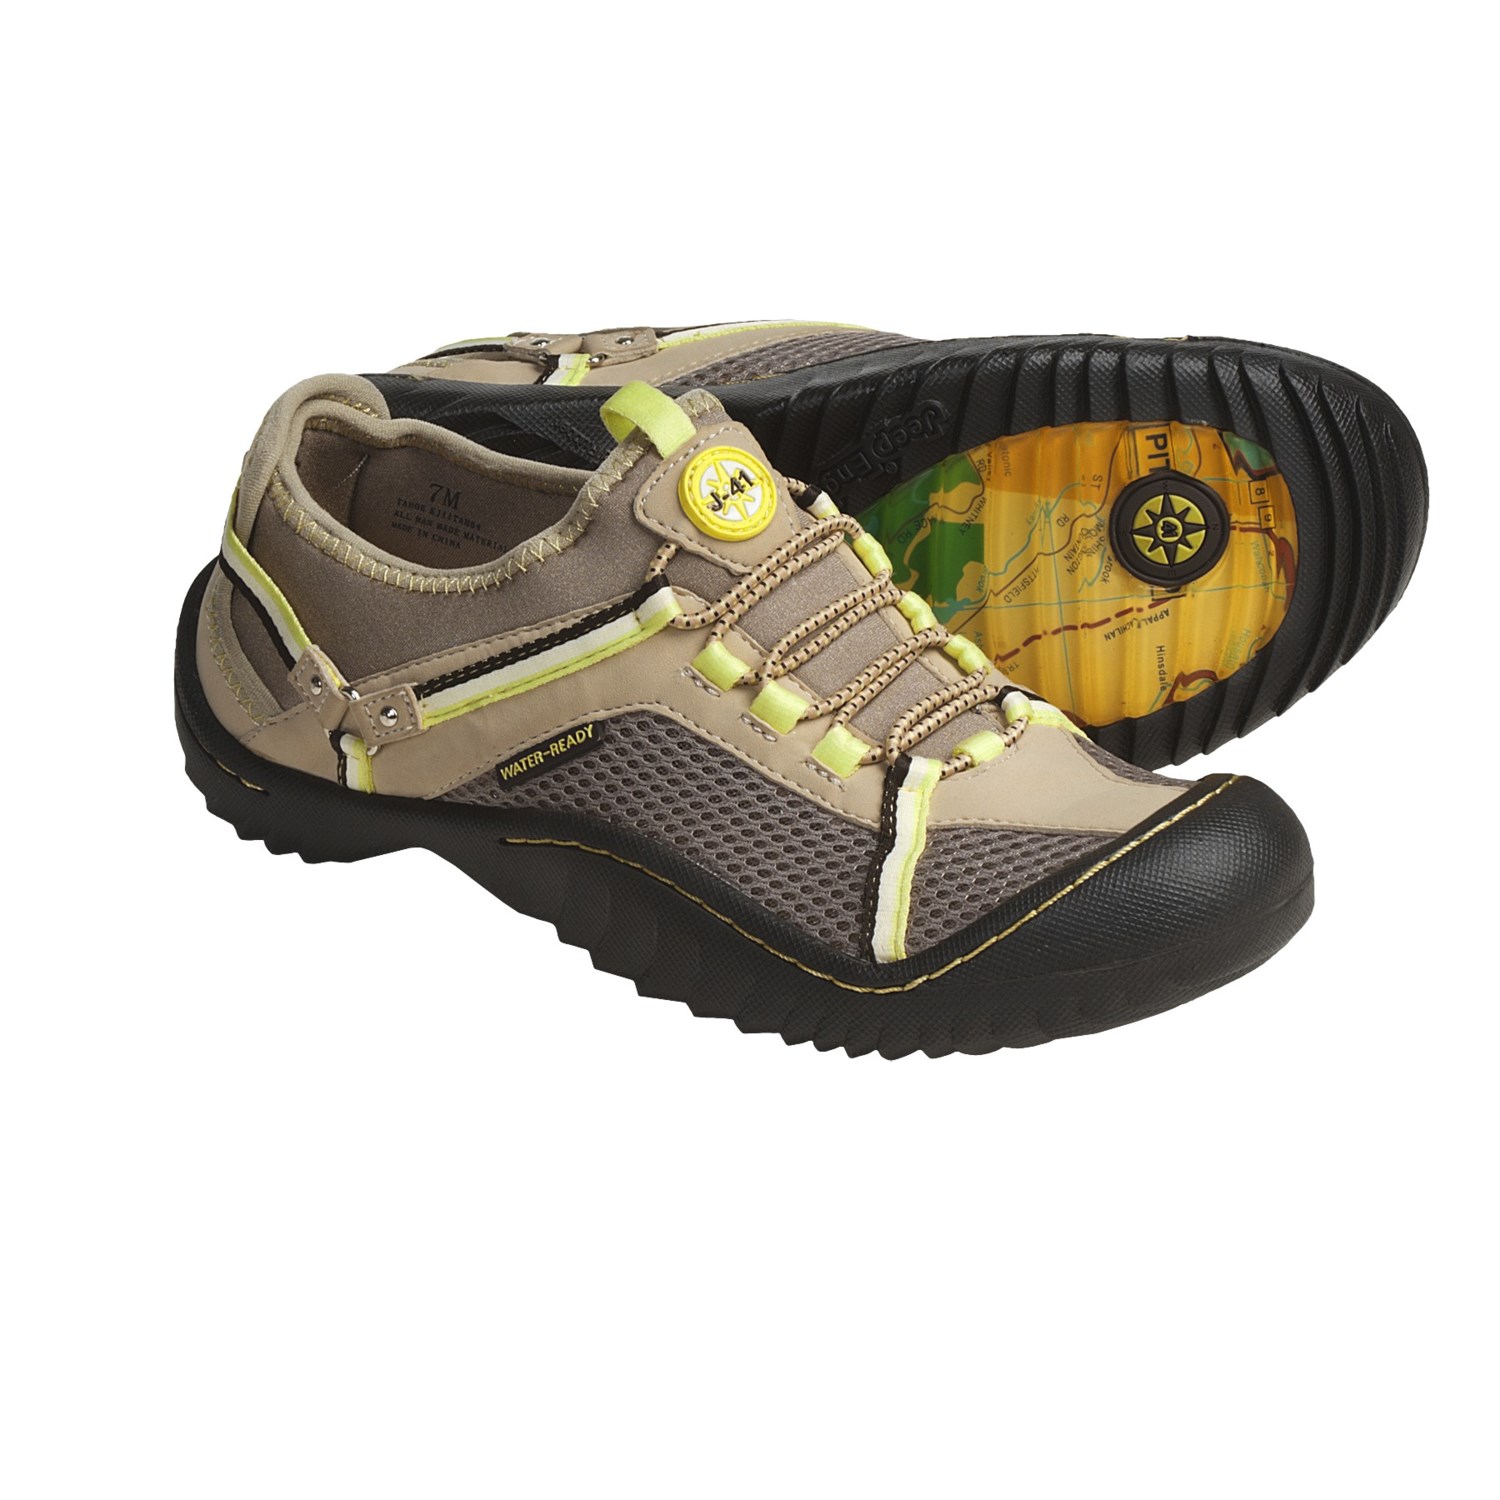 J41 Tahoe Shoes (For Women) 4245R Save 44